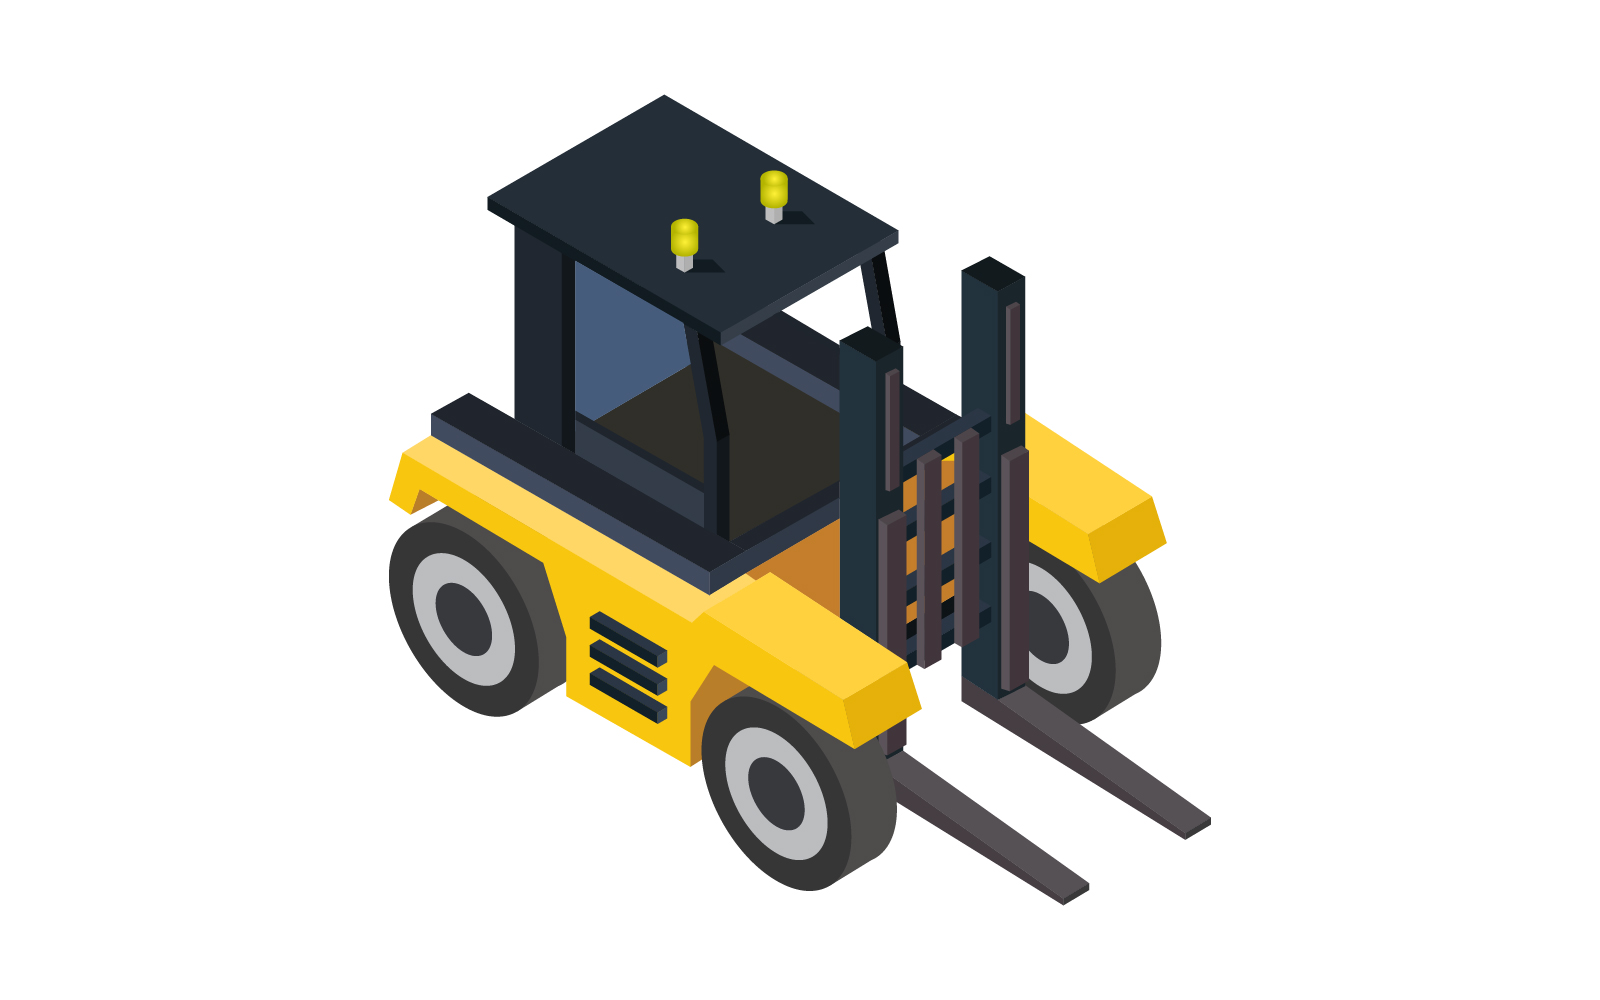 Forklift illustrated  on a white background